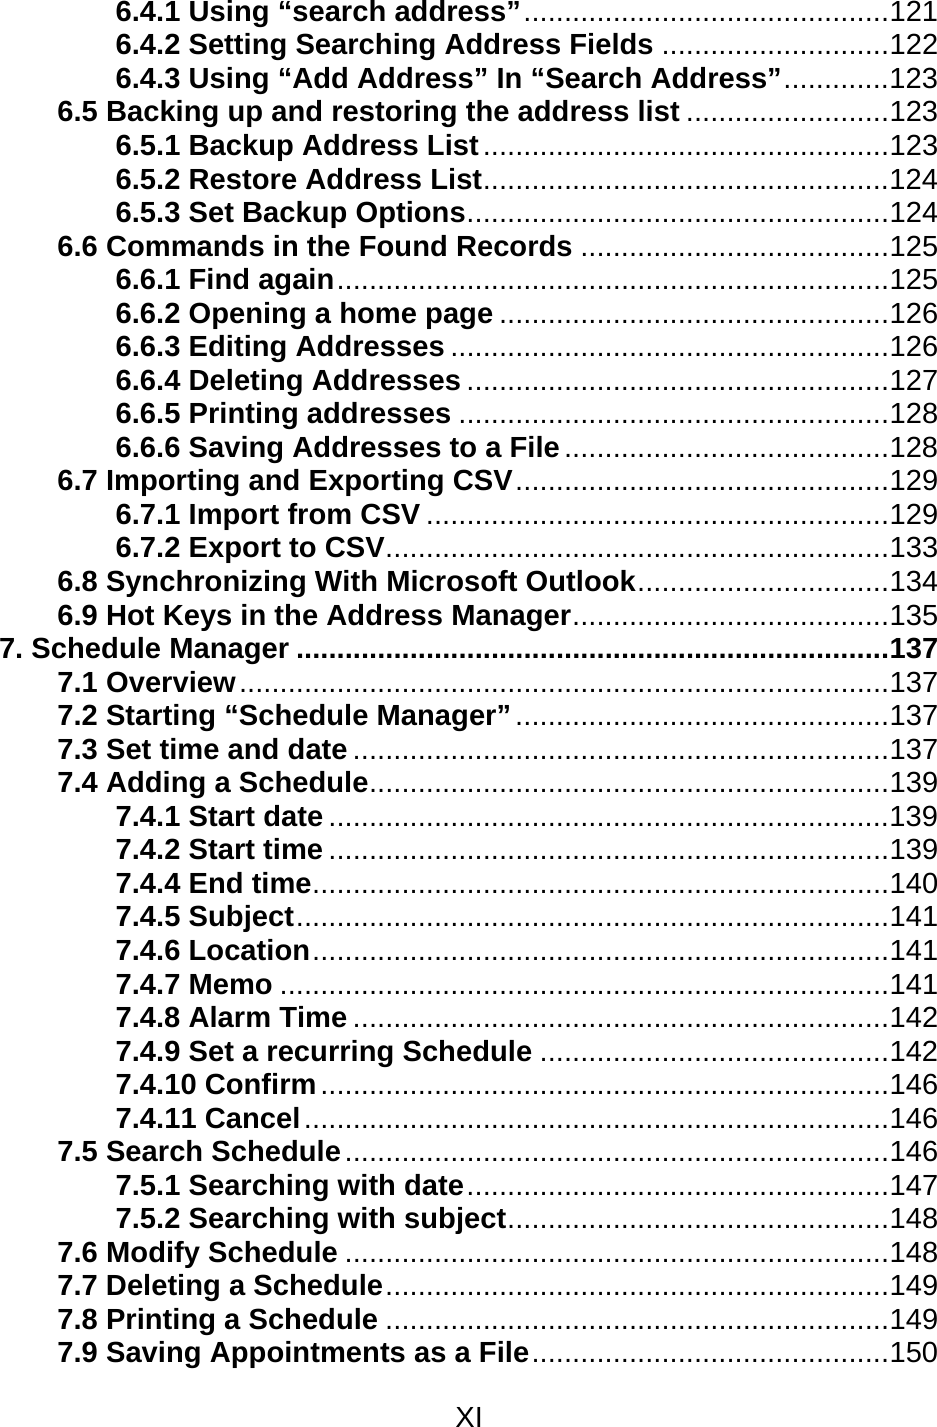 XI  6.4.1 Using “search address”.............................................121 6.4.2 Setting Searching Address Fields ............................122 6.4.3 Using “Add Address” In “Search Address”.............123 6.5 Backing up and restoring the address list .........................123 6.5.1 Backup Address List..................................................123 6.5.2 Restore Address List..................................................124 6.5.3 Set Backup Options....................................................124 6.6 Commands in the Found Records ......................................125 6.6.1 Find again....................................................................125 6.6.2 Opening a home page ................................................126 6.6.3 Editing Addresses ......................................................126 6.6.4 Deleting Addresses ....................................................127 6.6.5 Printing addresses .....................................................128 6.6.6 Saving Addresses to a File........................................128 6.7 Importing and Exporting CSV..............................................129 6.7.1 Import from CSV .........................................................129 6.7.2 Export to CSV..............................................................133 6.8 Synchronizing With Microsoft Outlook...............................134 6.9 Hot Keys in the Address Manager.......................................135 7. Schedule Manager .........................................................................137 7.1 Overview................................................................................137 7.2 Starting “Schedule Manager”..............................................137 7.3 Set time and date ..................................................................137 7.4 Adding a Schedule................................................................139 7.4.1 Start date .....................................................................139 7.4.2 Start time .....................................................................139 7.4.4 End time.......................................................................140 7.4.5 Subject.........................................................................141 7.4.6 Location.......................................................................141 7.4.7 Memo ...........................................................................141 7.4.8 Alarm Time ..................................................................142 7.4.9 Set a recurring Schedule ...........................................142 7.4.10 Confirm......................................................................146 7.4.11 Cancel........................................................................146 7.5 Search Schedule...................................................................146 7.5.1 Searching with date....................................................147 7.5.2 Searching with subject...............................................148 7.6 Modify Schedule ...................................................................148 7.7 Deleting a Schedule..............................................................149 7.8 Printing a Schedule ..............................................................149 7.9 Saving Appointments as a File............................................150 